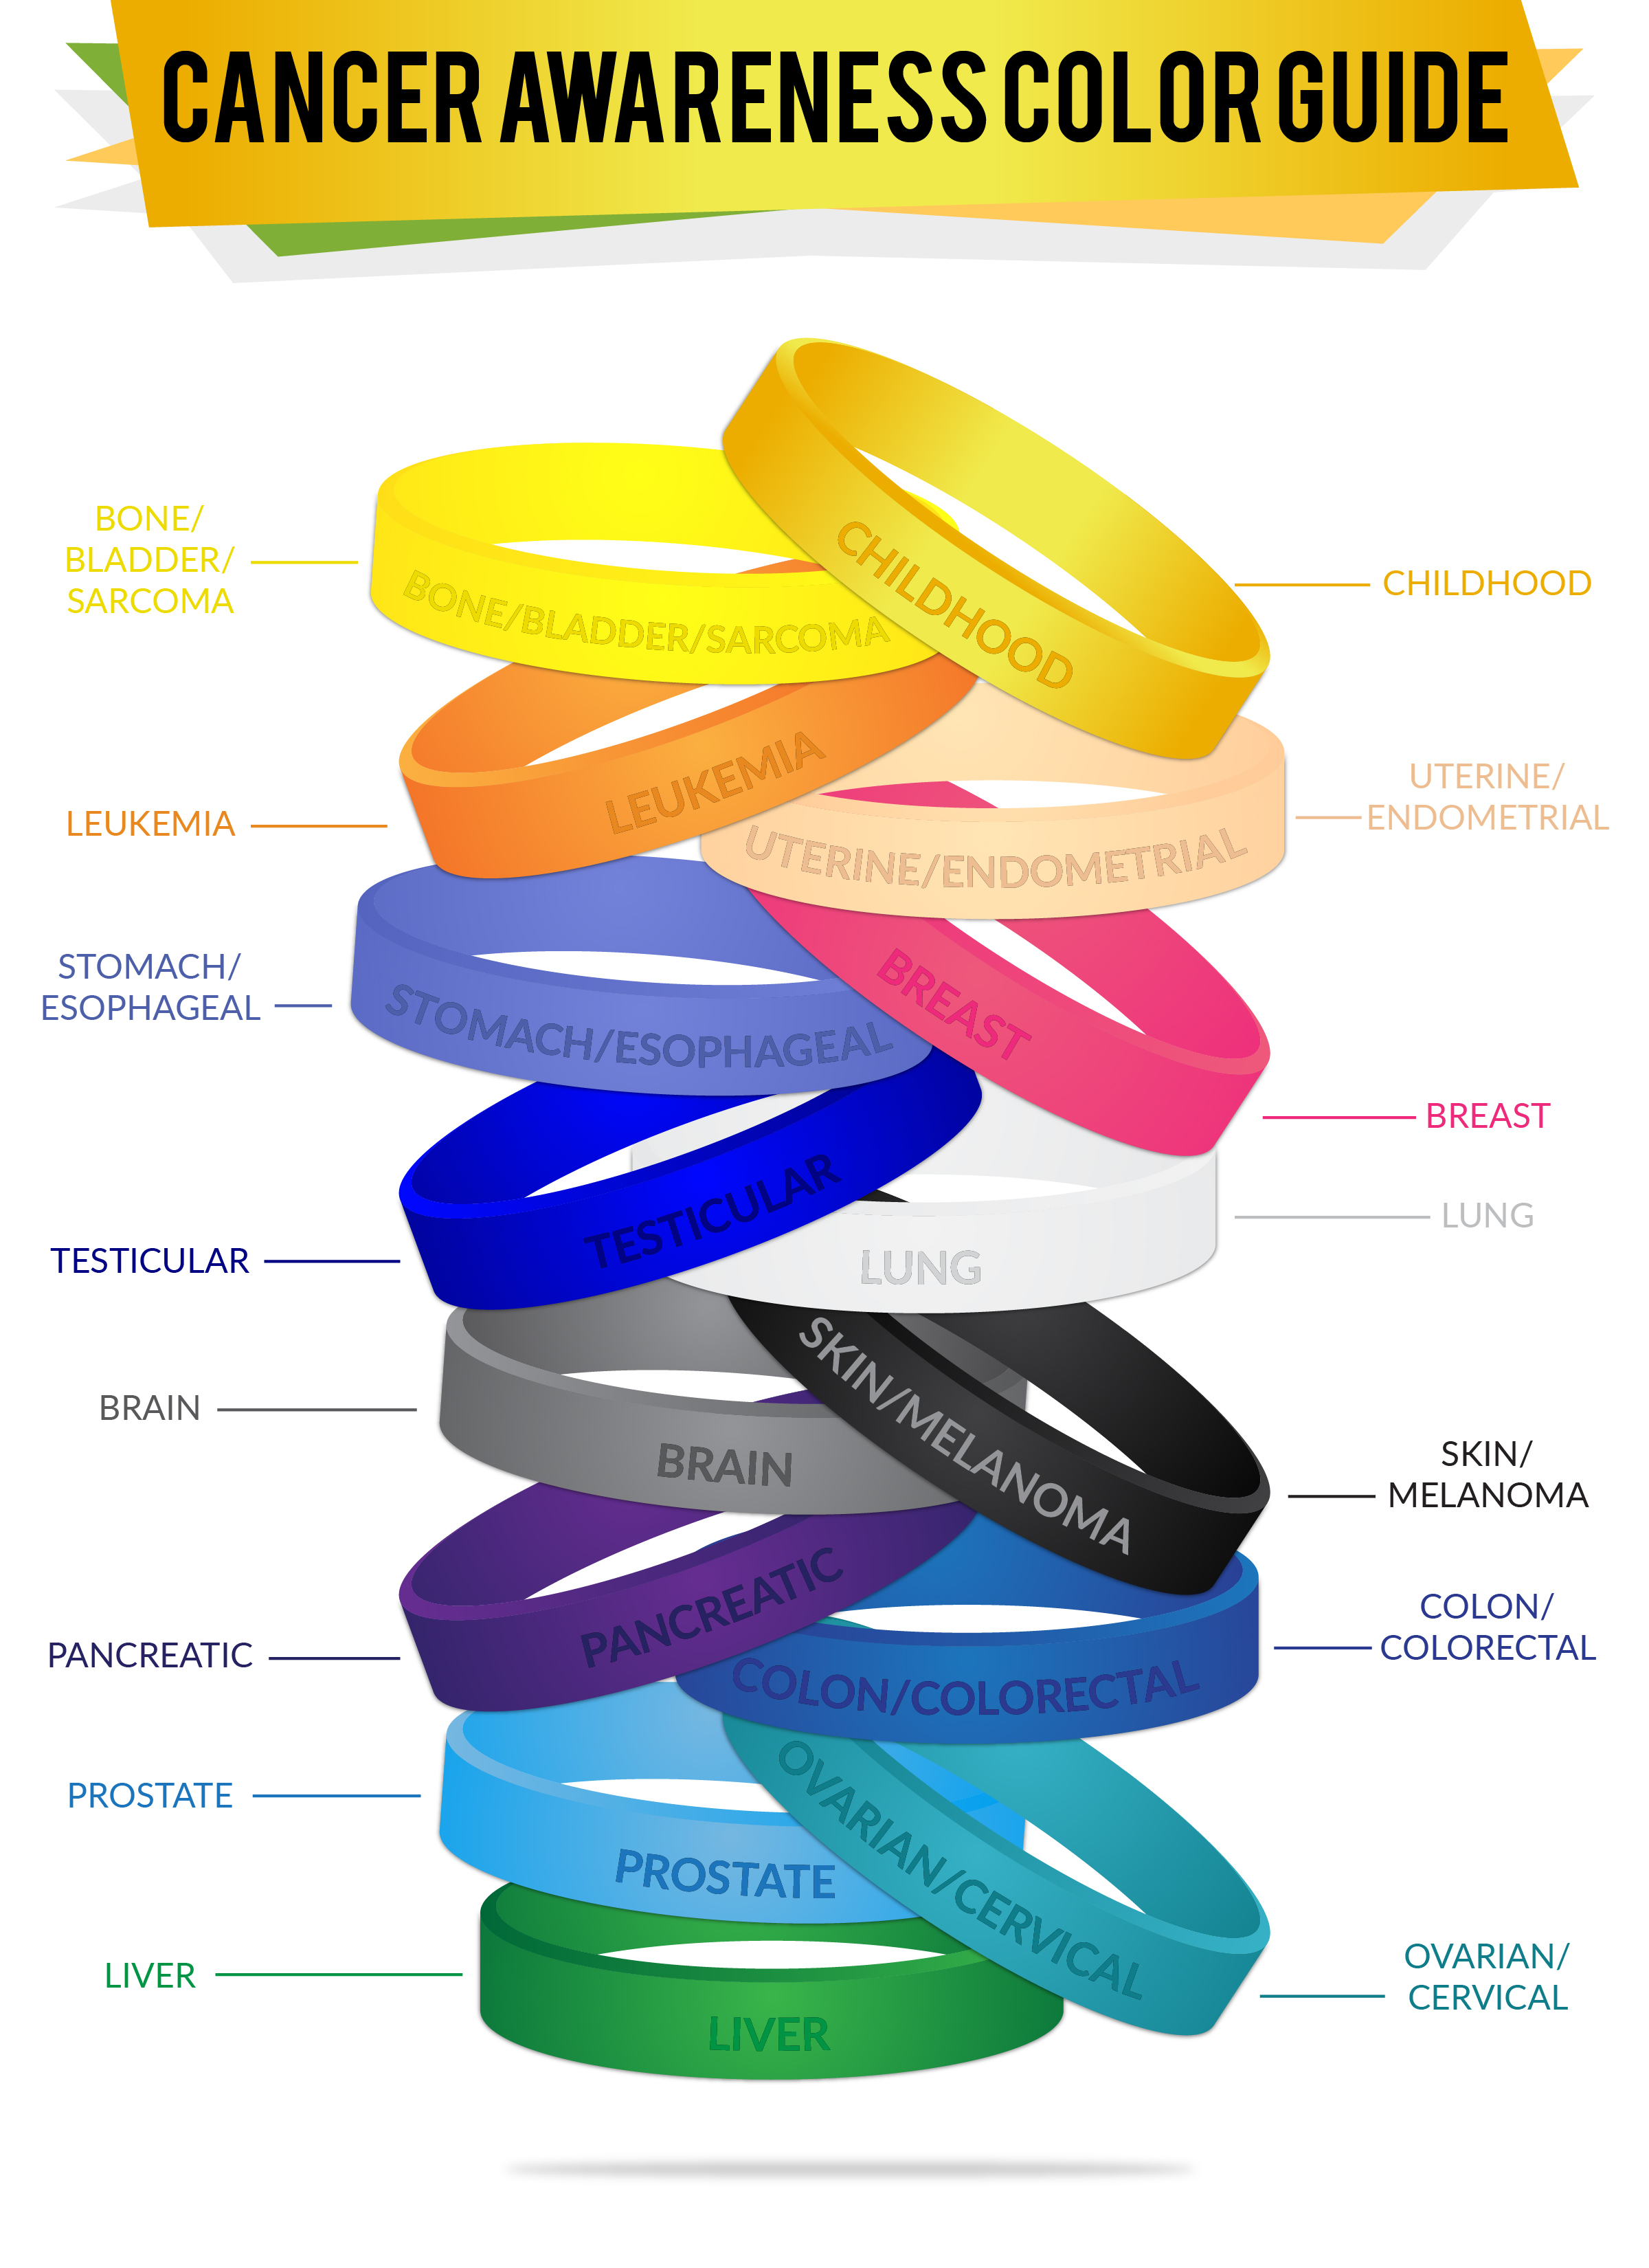 Cancer color awareness color guide infographic. Each color wristbands represent particular cancer.